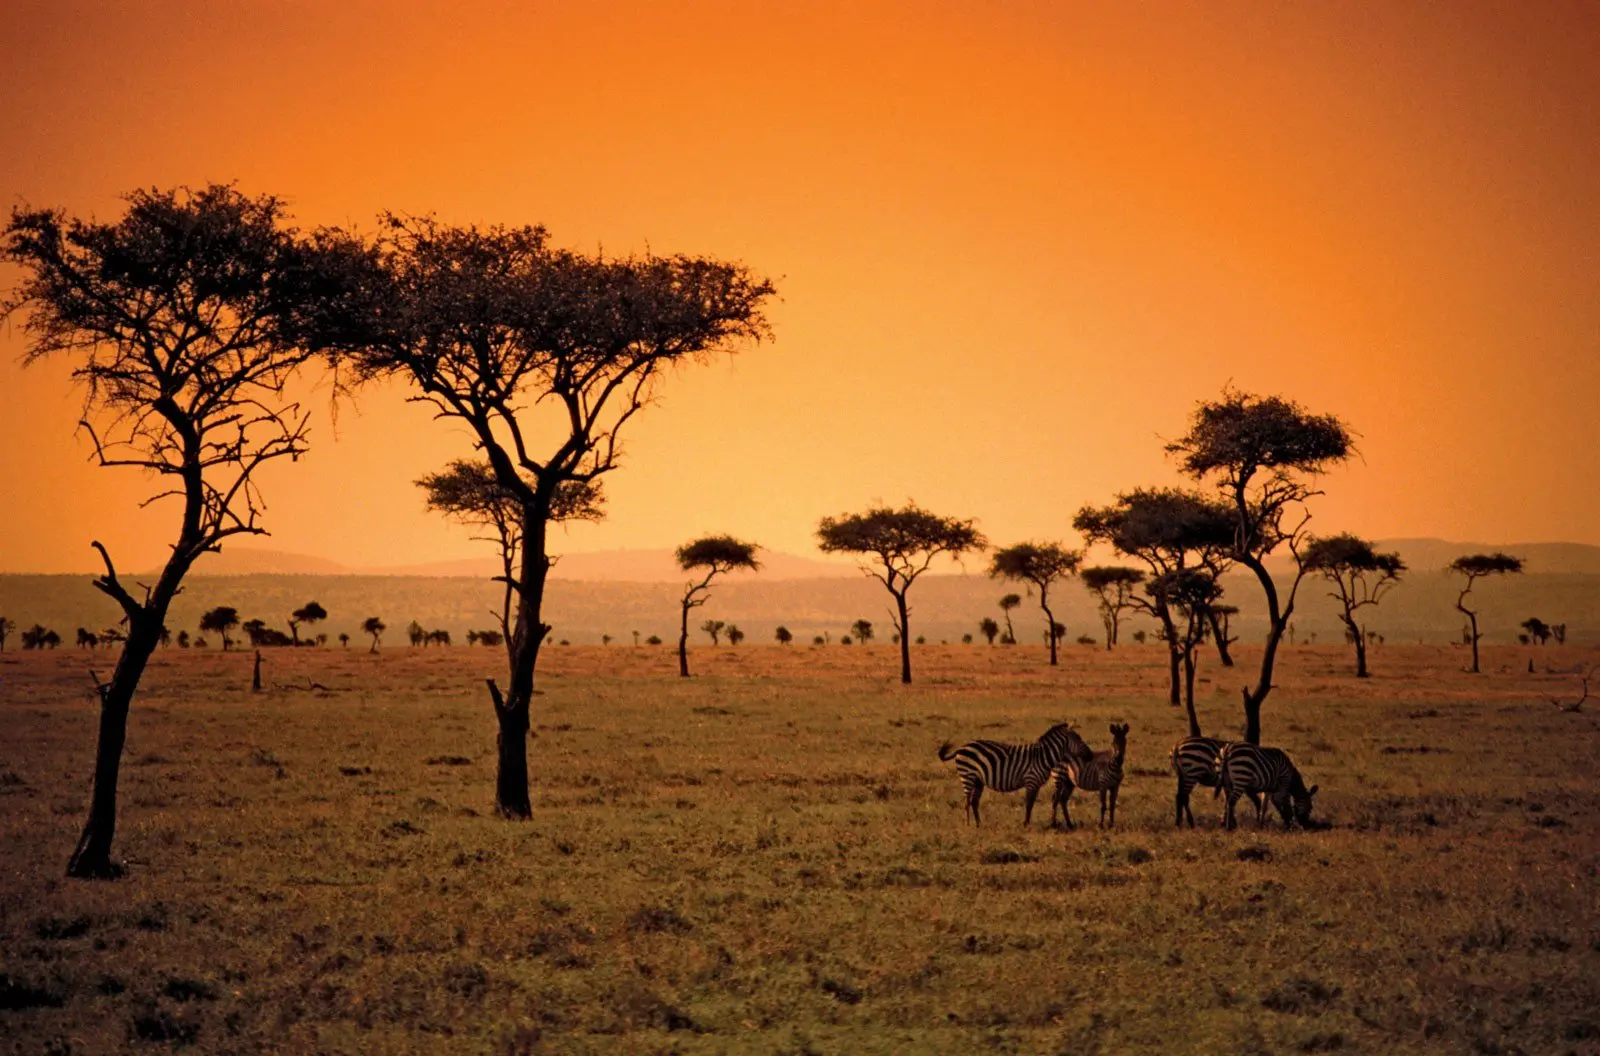 Africa's Natural Beauty